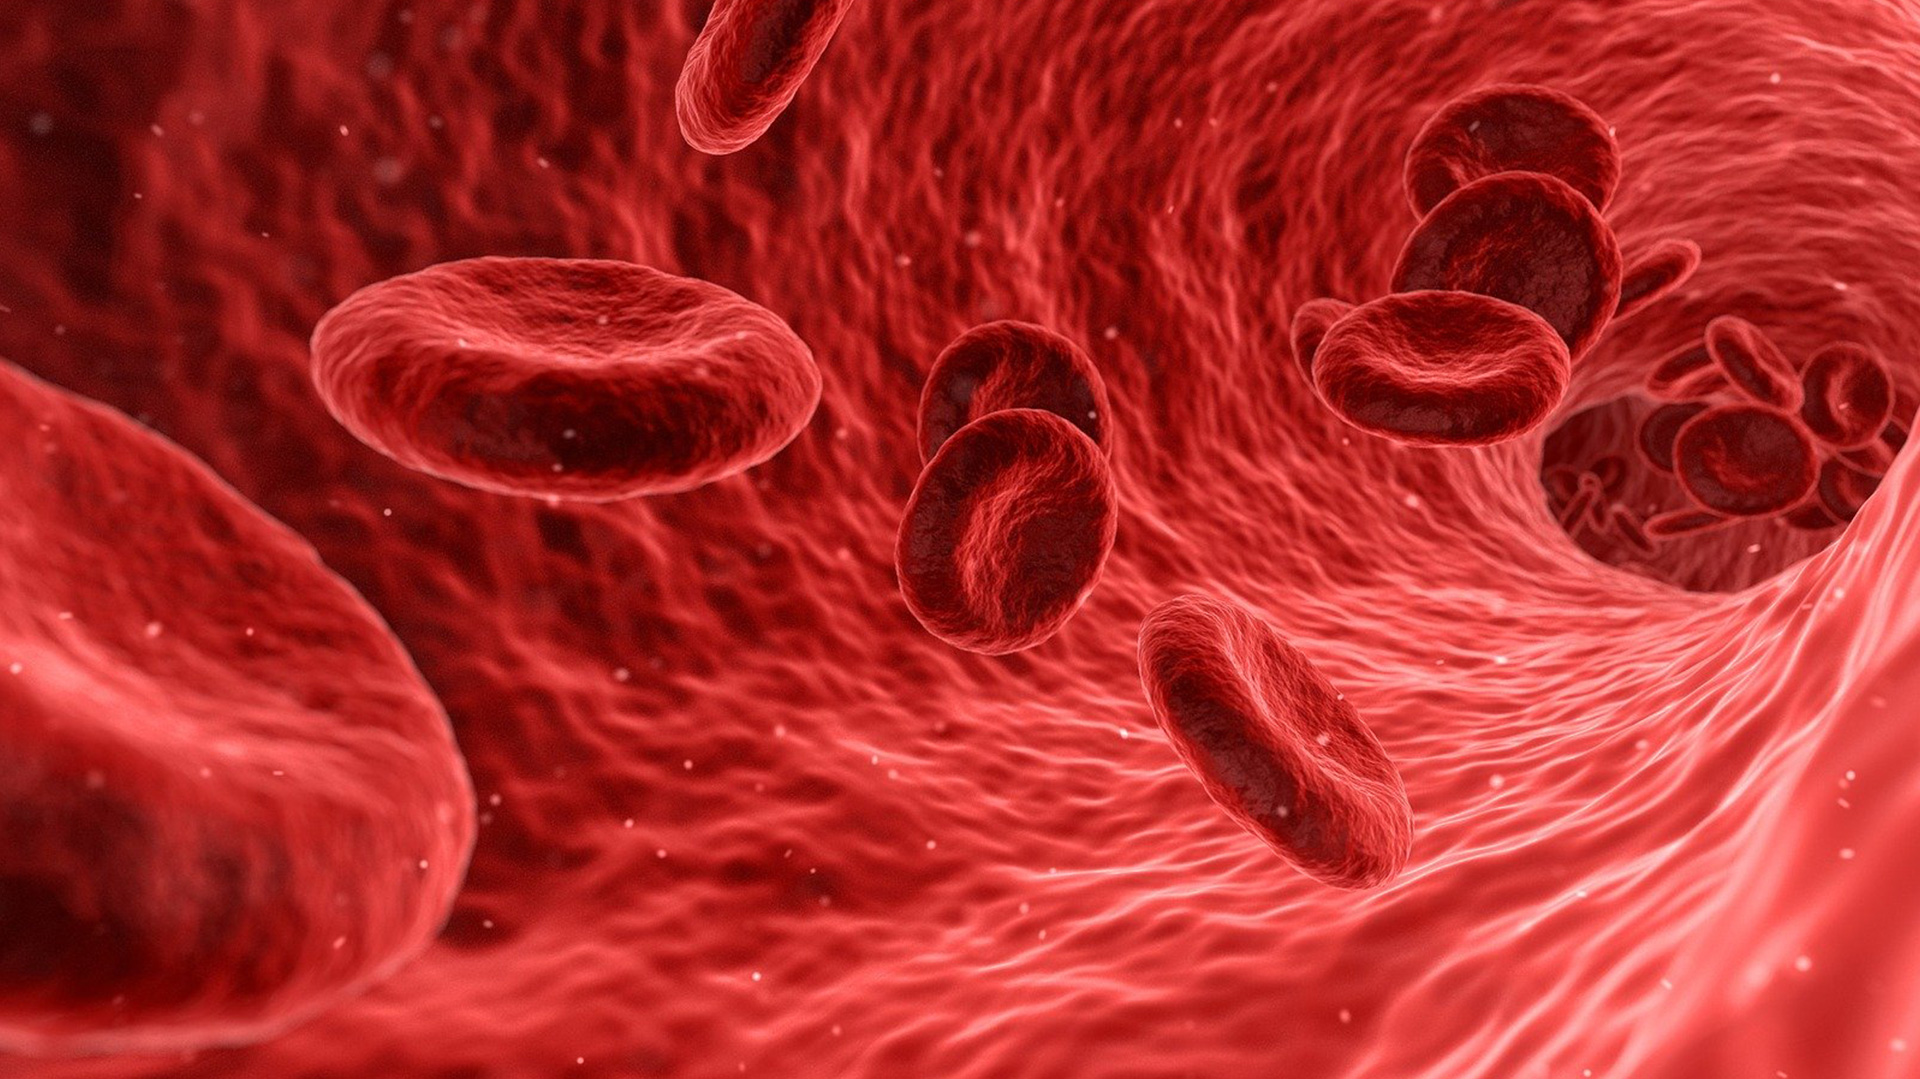 red blood cells in an artery